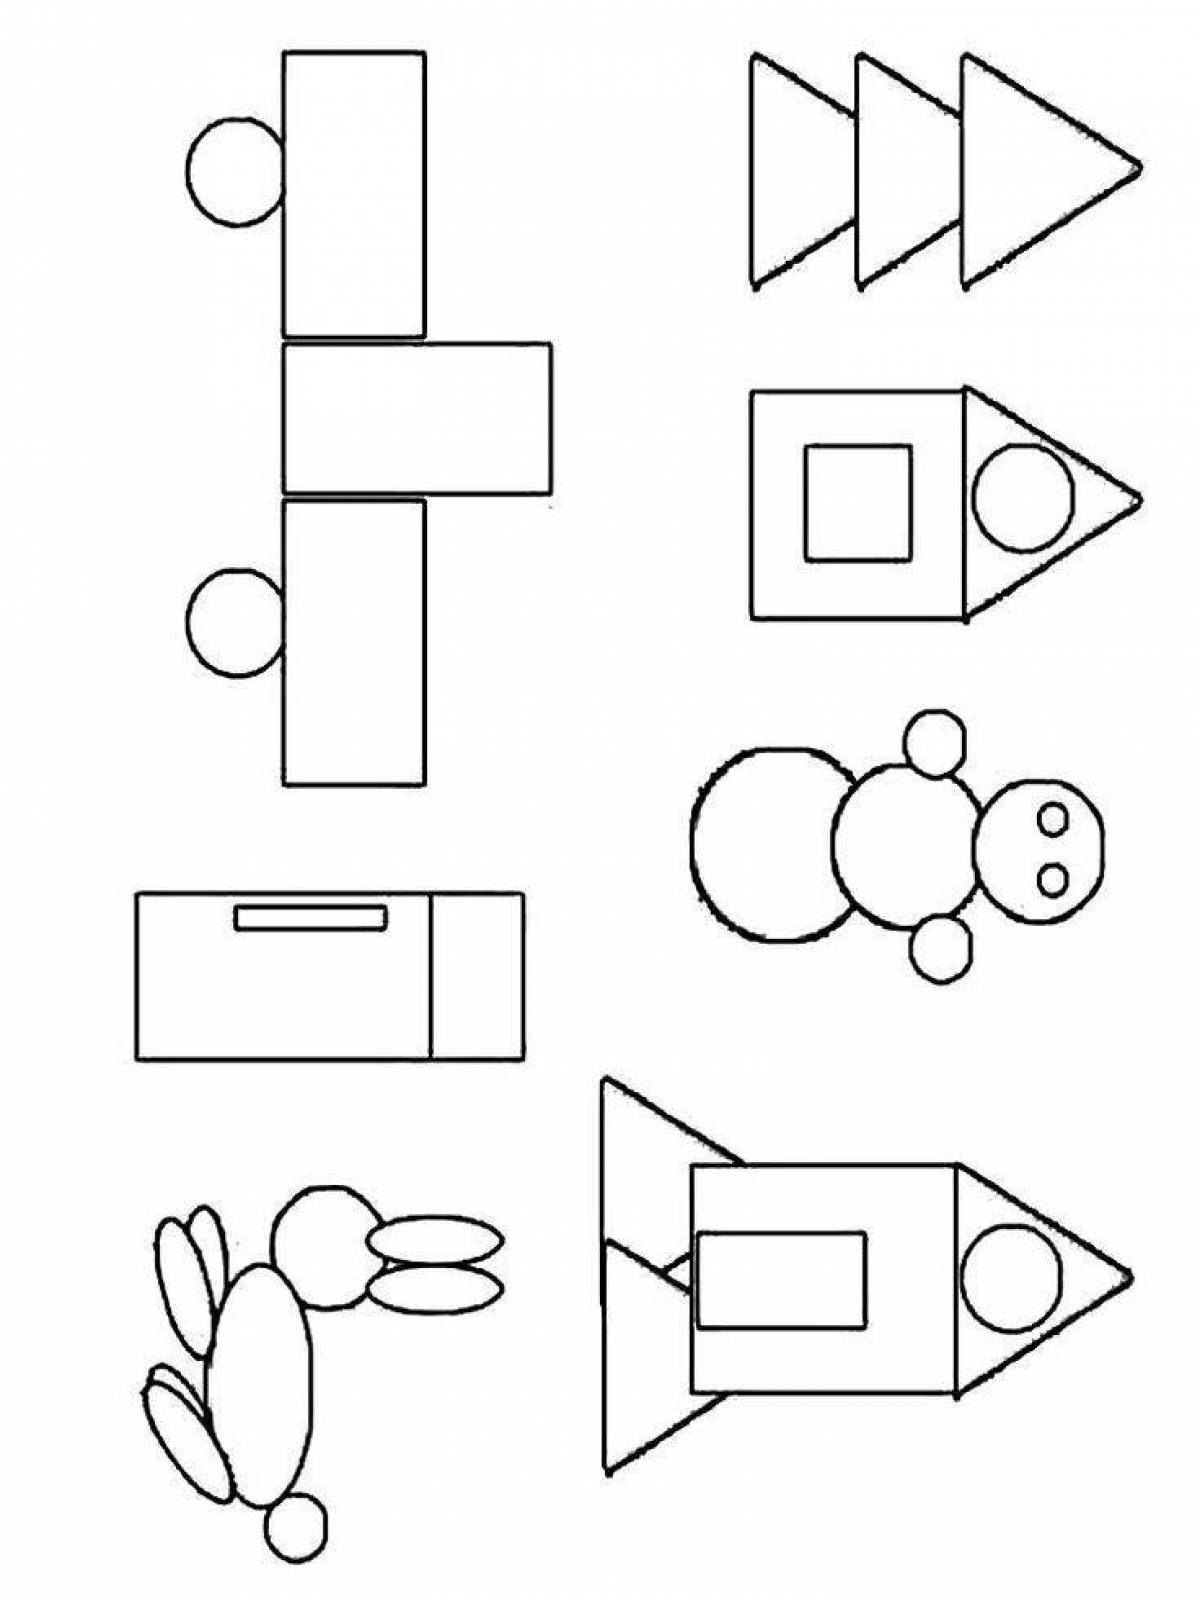 Creative geometric shapes coloring book for 3-4 year olds